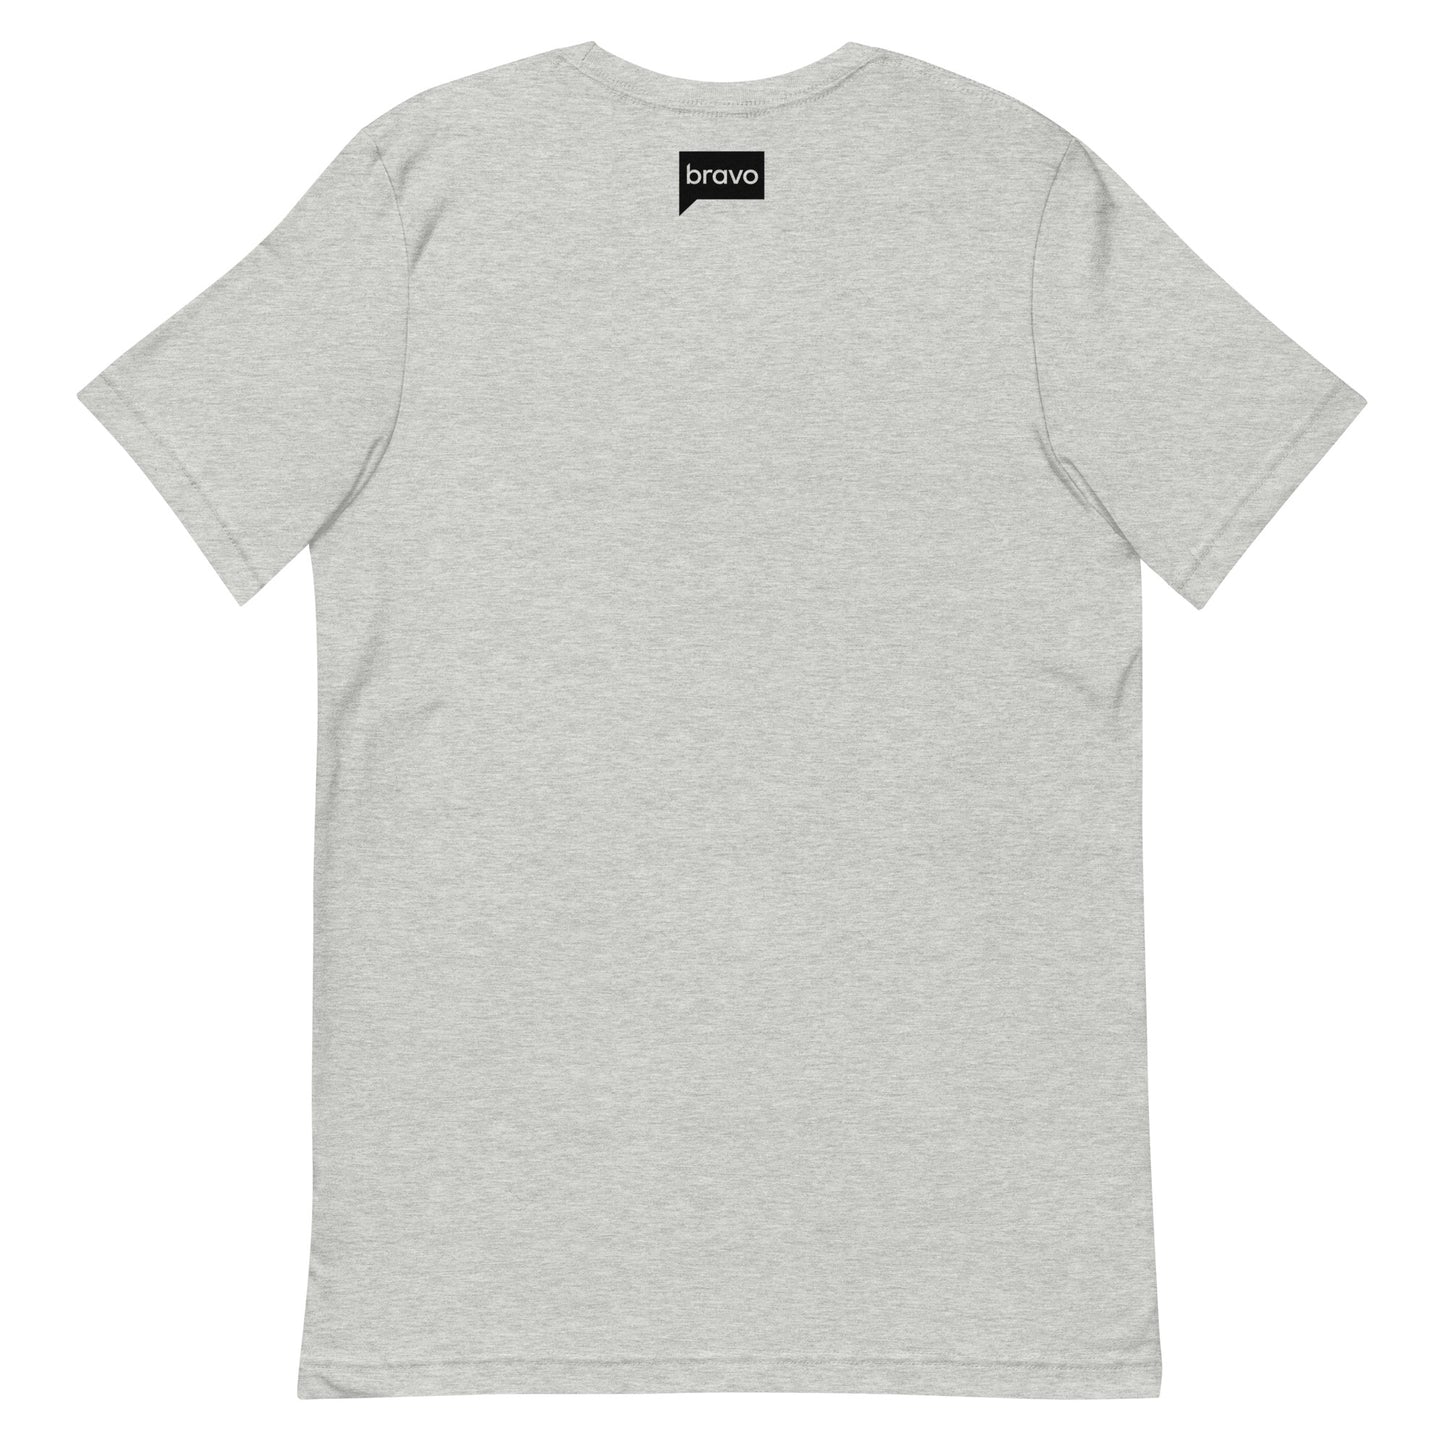 Top Chef Pack Your Knives T-Shirt